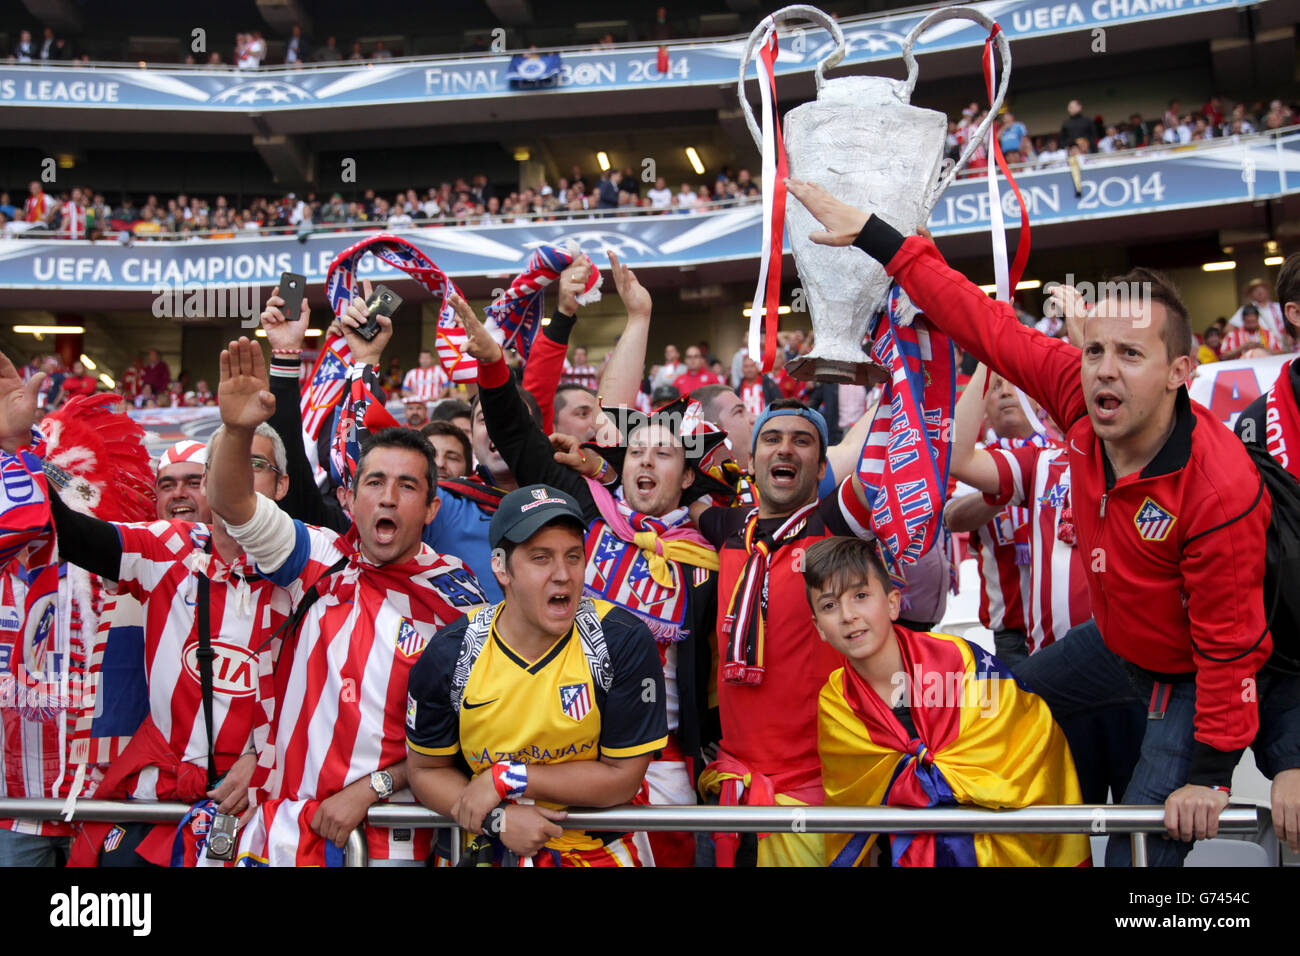 Atletico madrid hi-res stock photography and images - Alamy